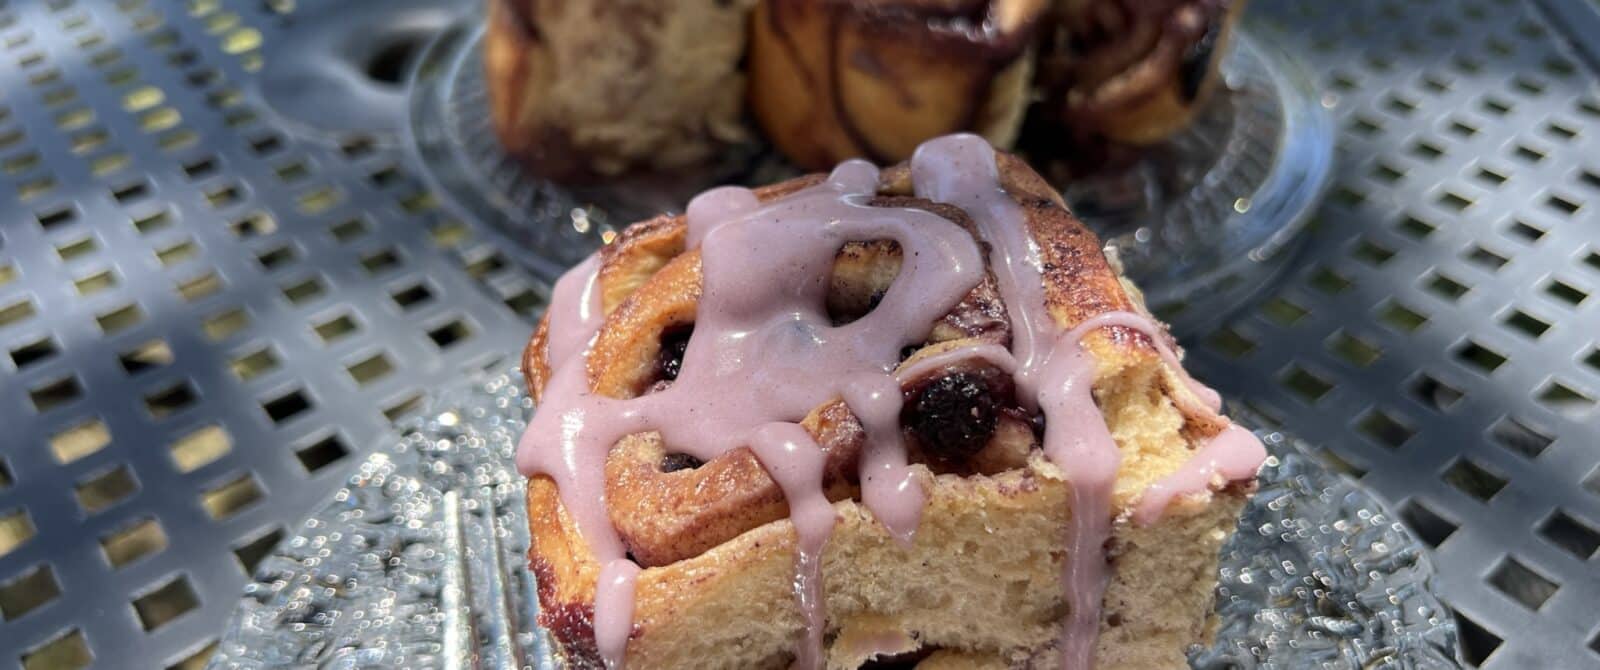 blueberry cinnamon rolls shown on a plate that's on an outdoor table.